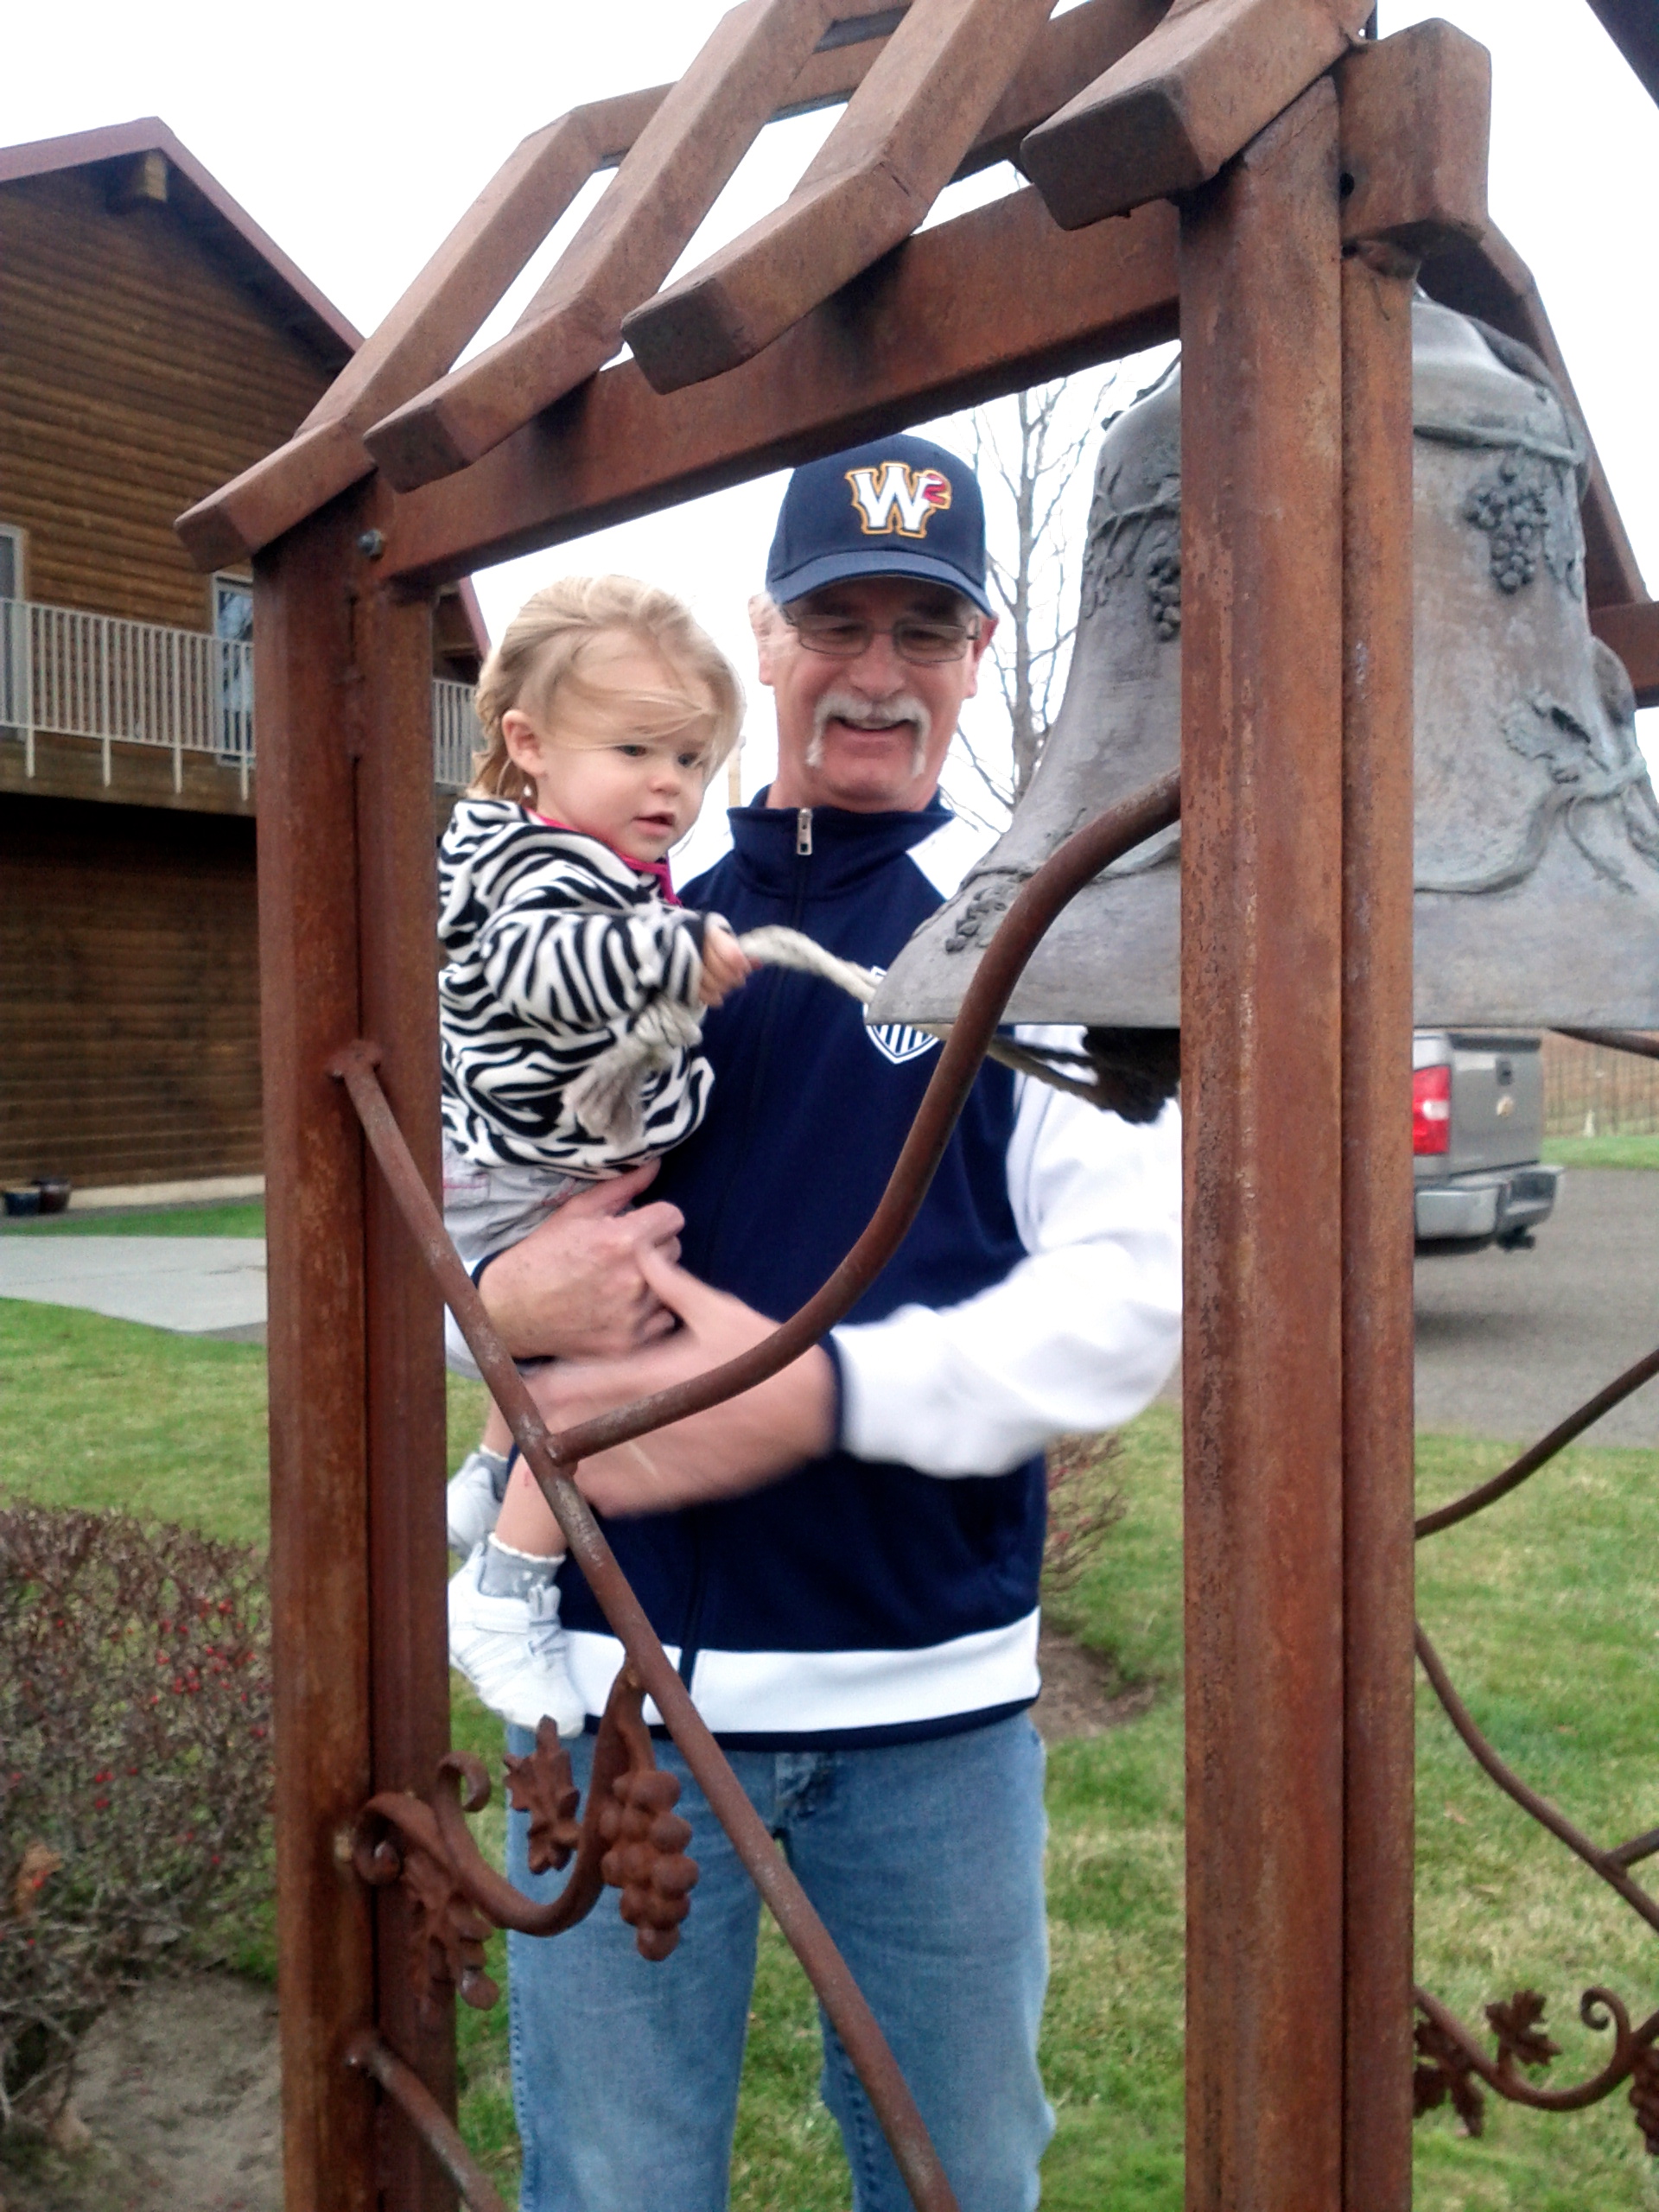 Ringing the bell for good luck at Walla Walla Vintners